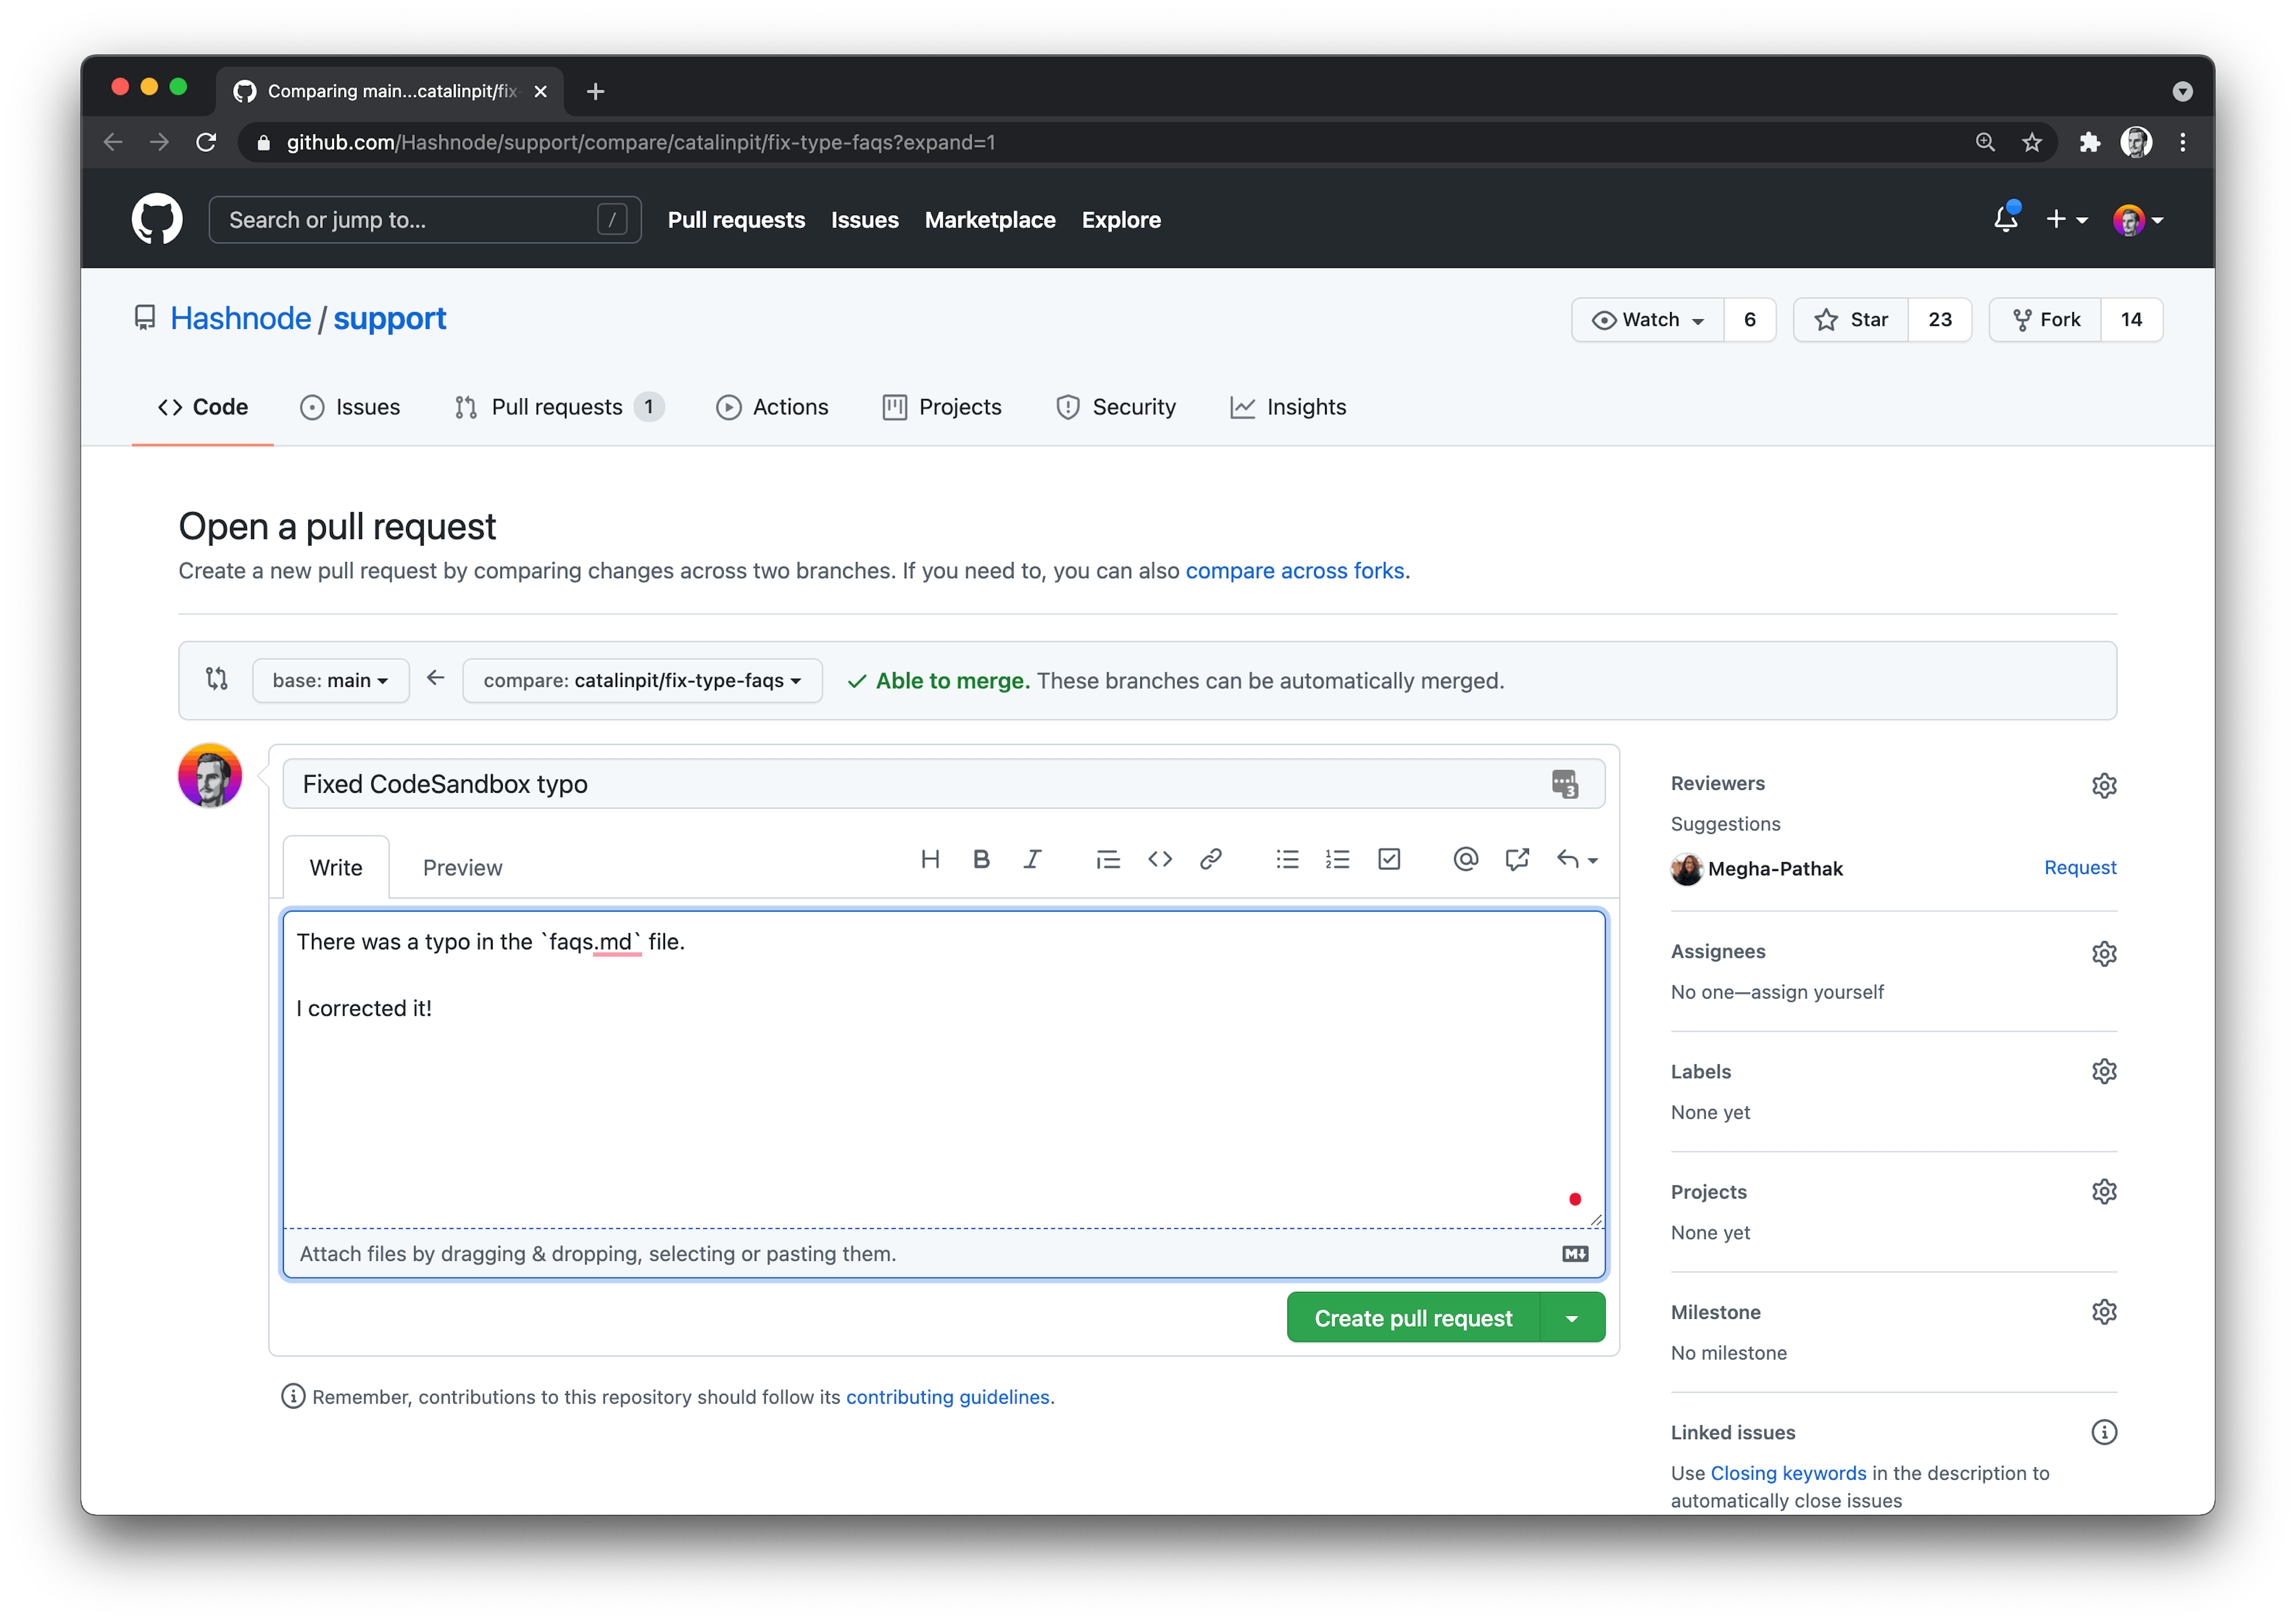 Creating a pull request on Github